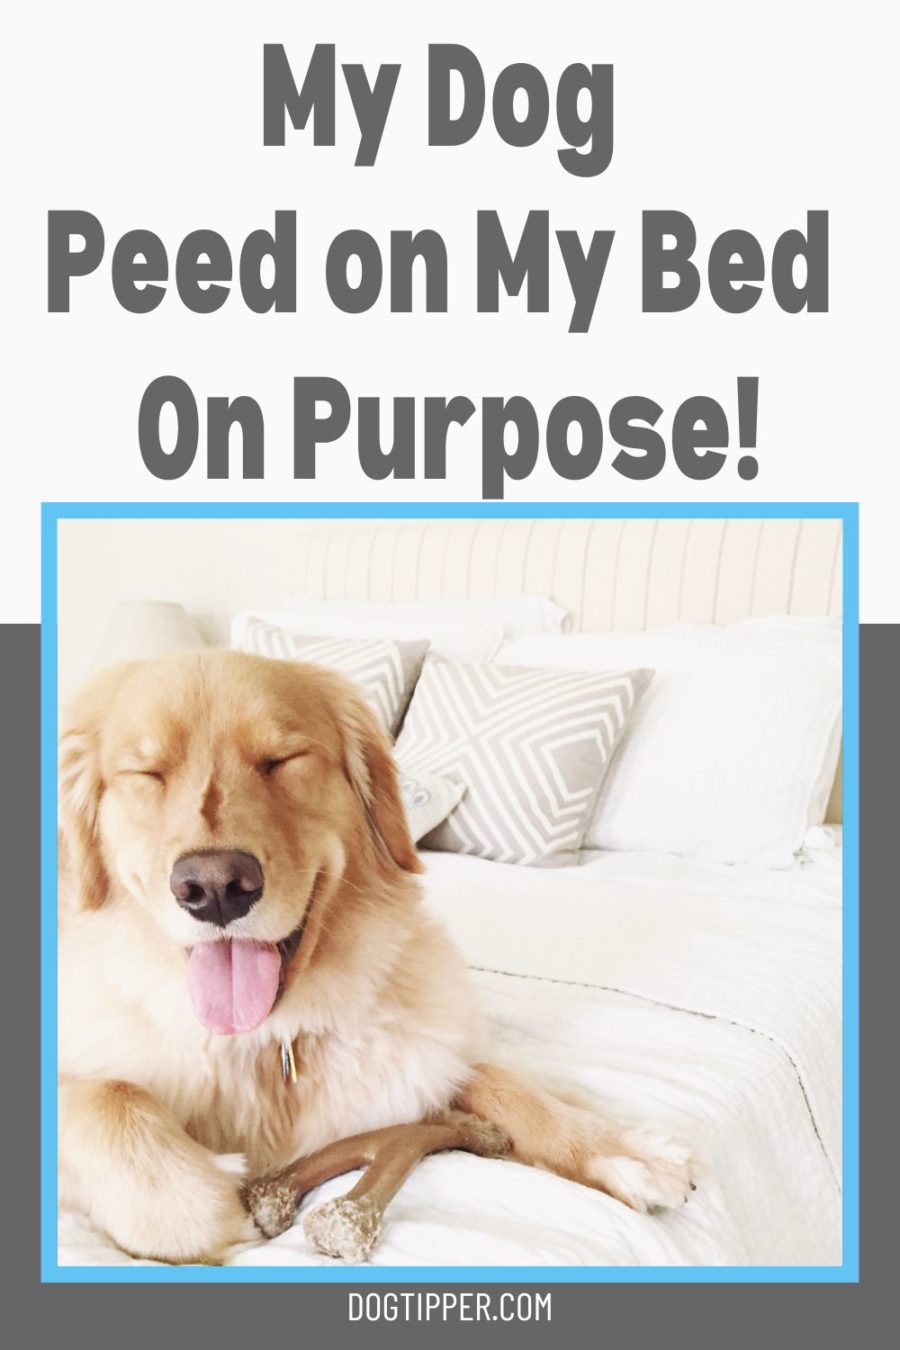 why would a dog pee and poop on the bed